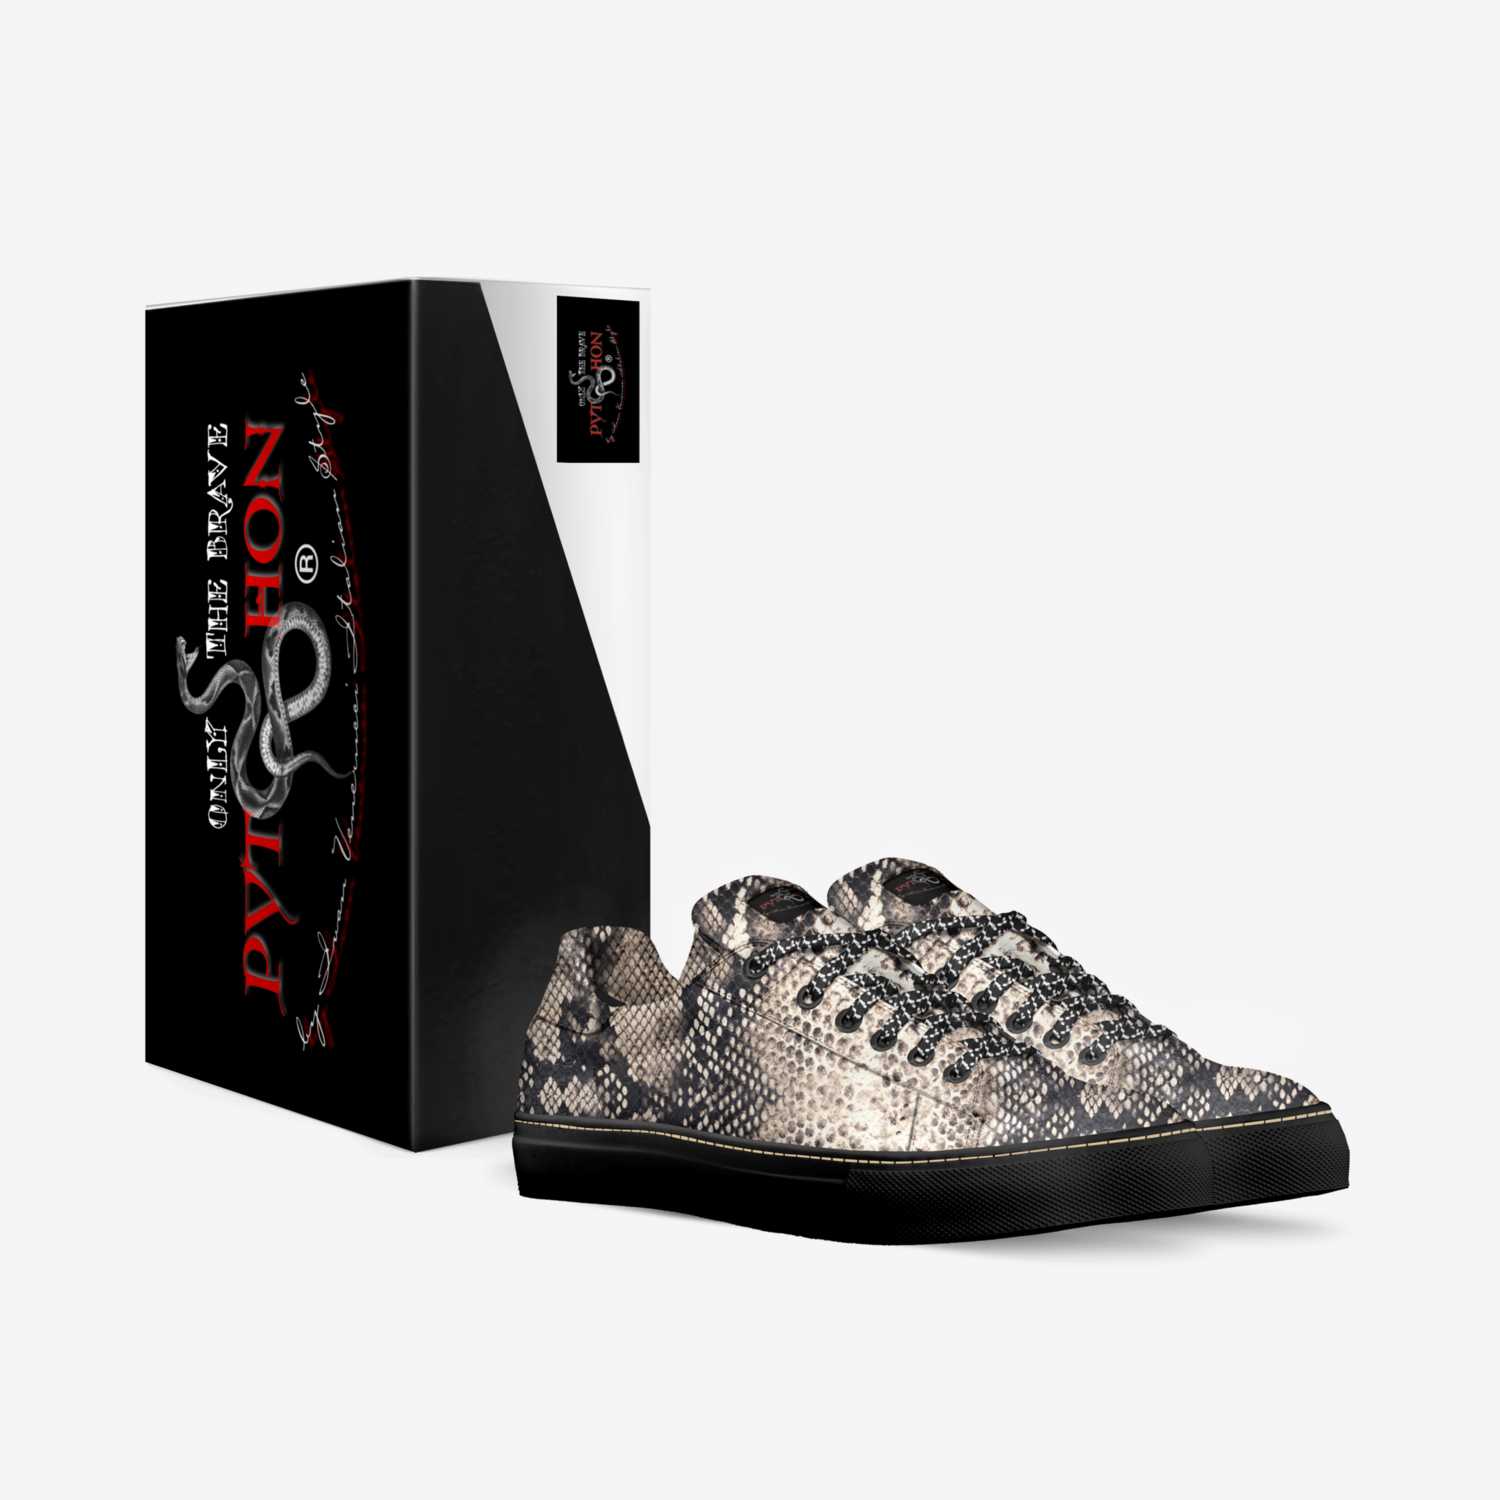 Python Style custom made in Italy shoes by Ivan Venerucci | Box view